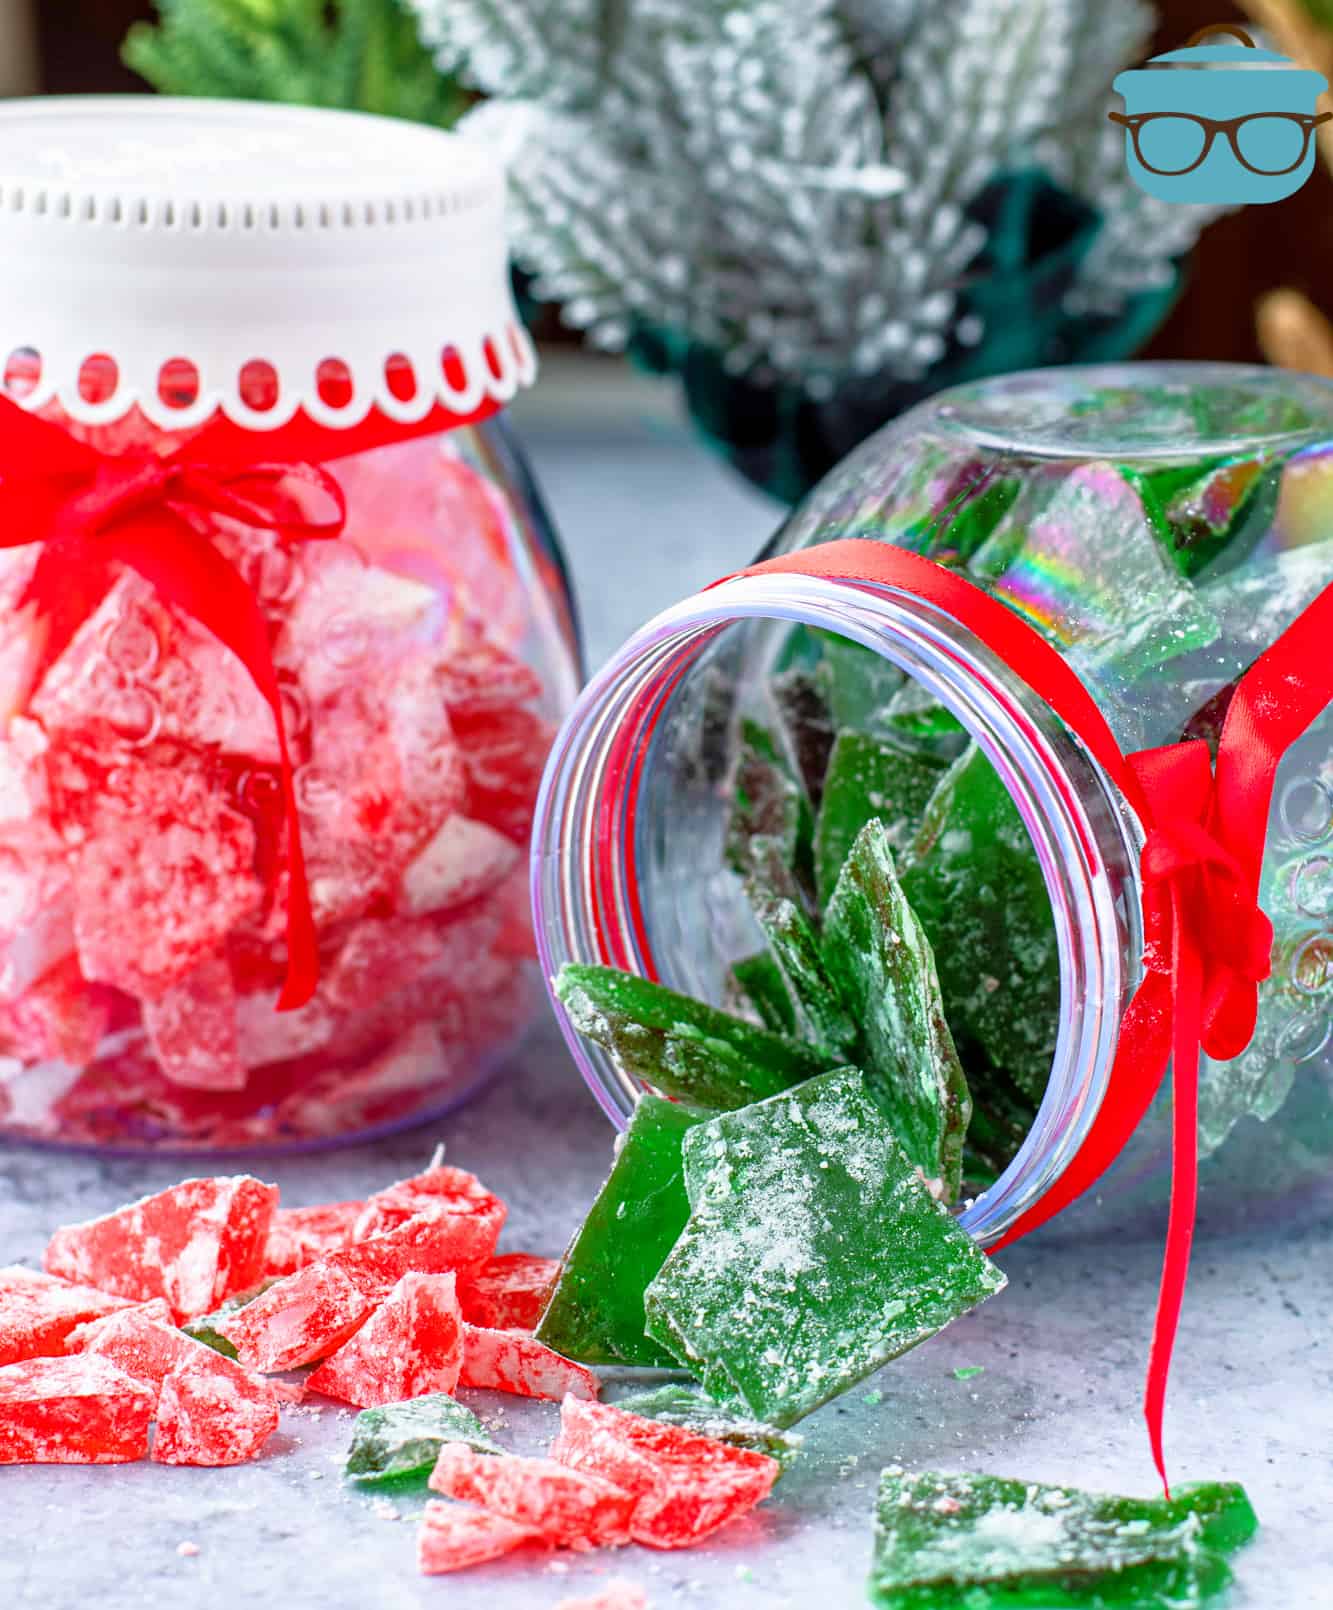 pieces of red and green cinnamon candy shown in glass containers.